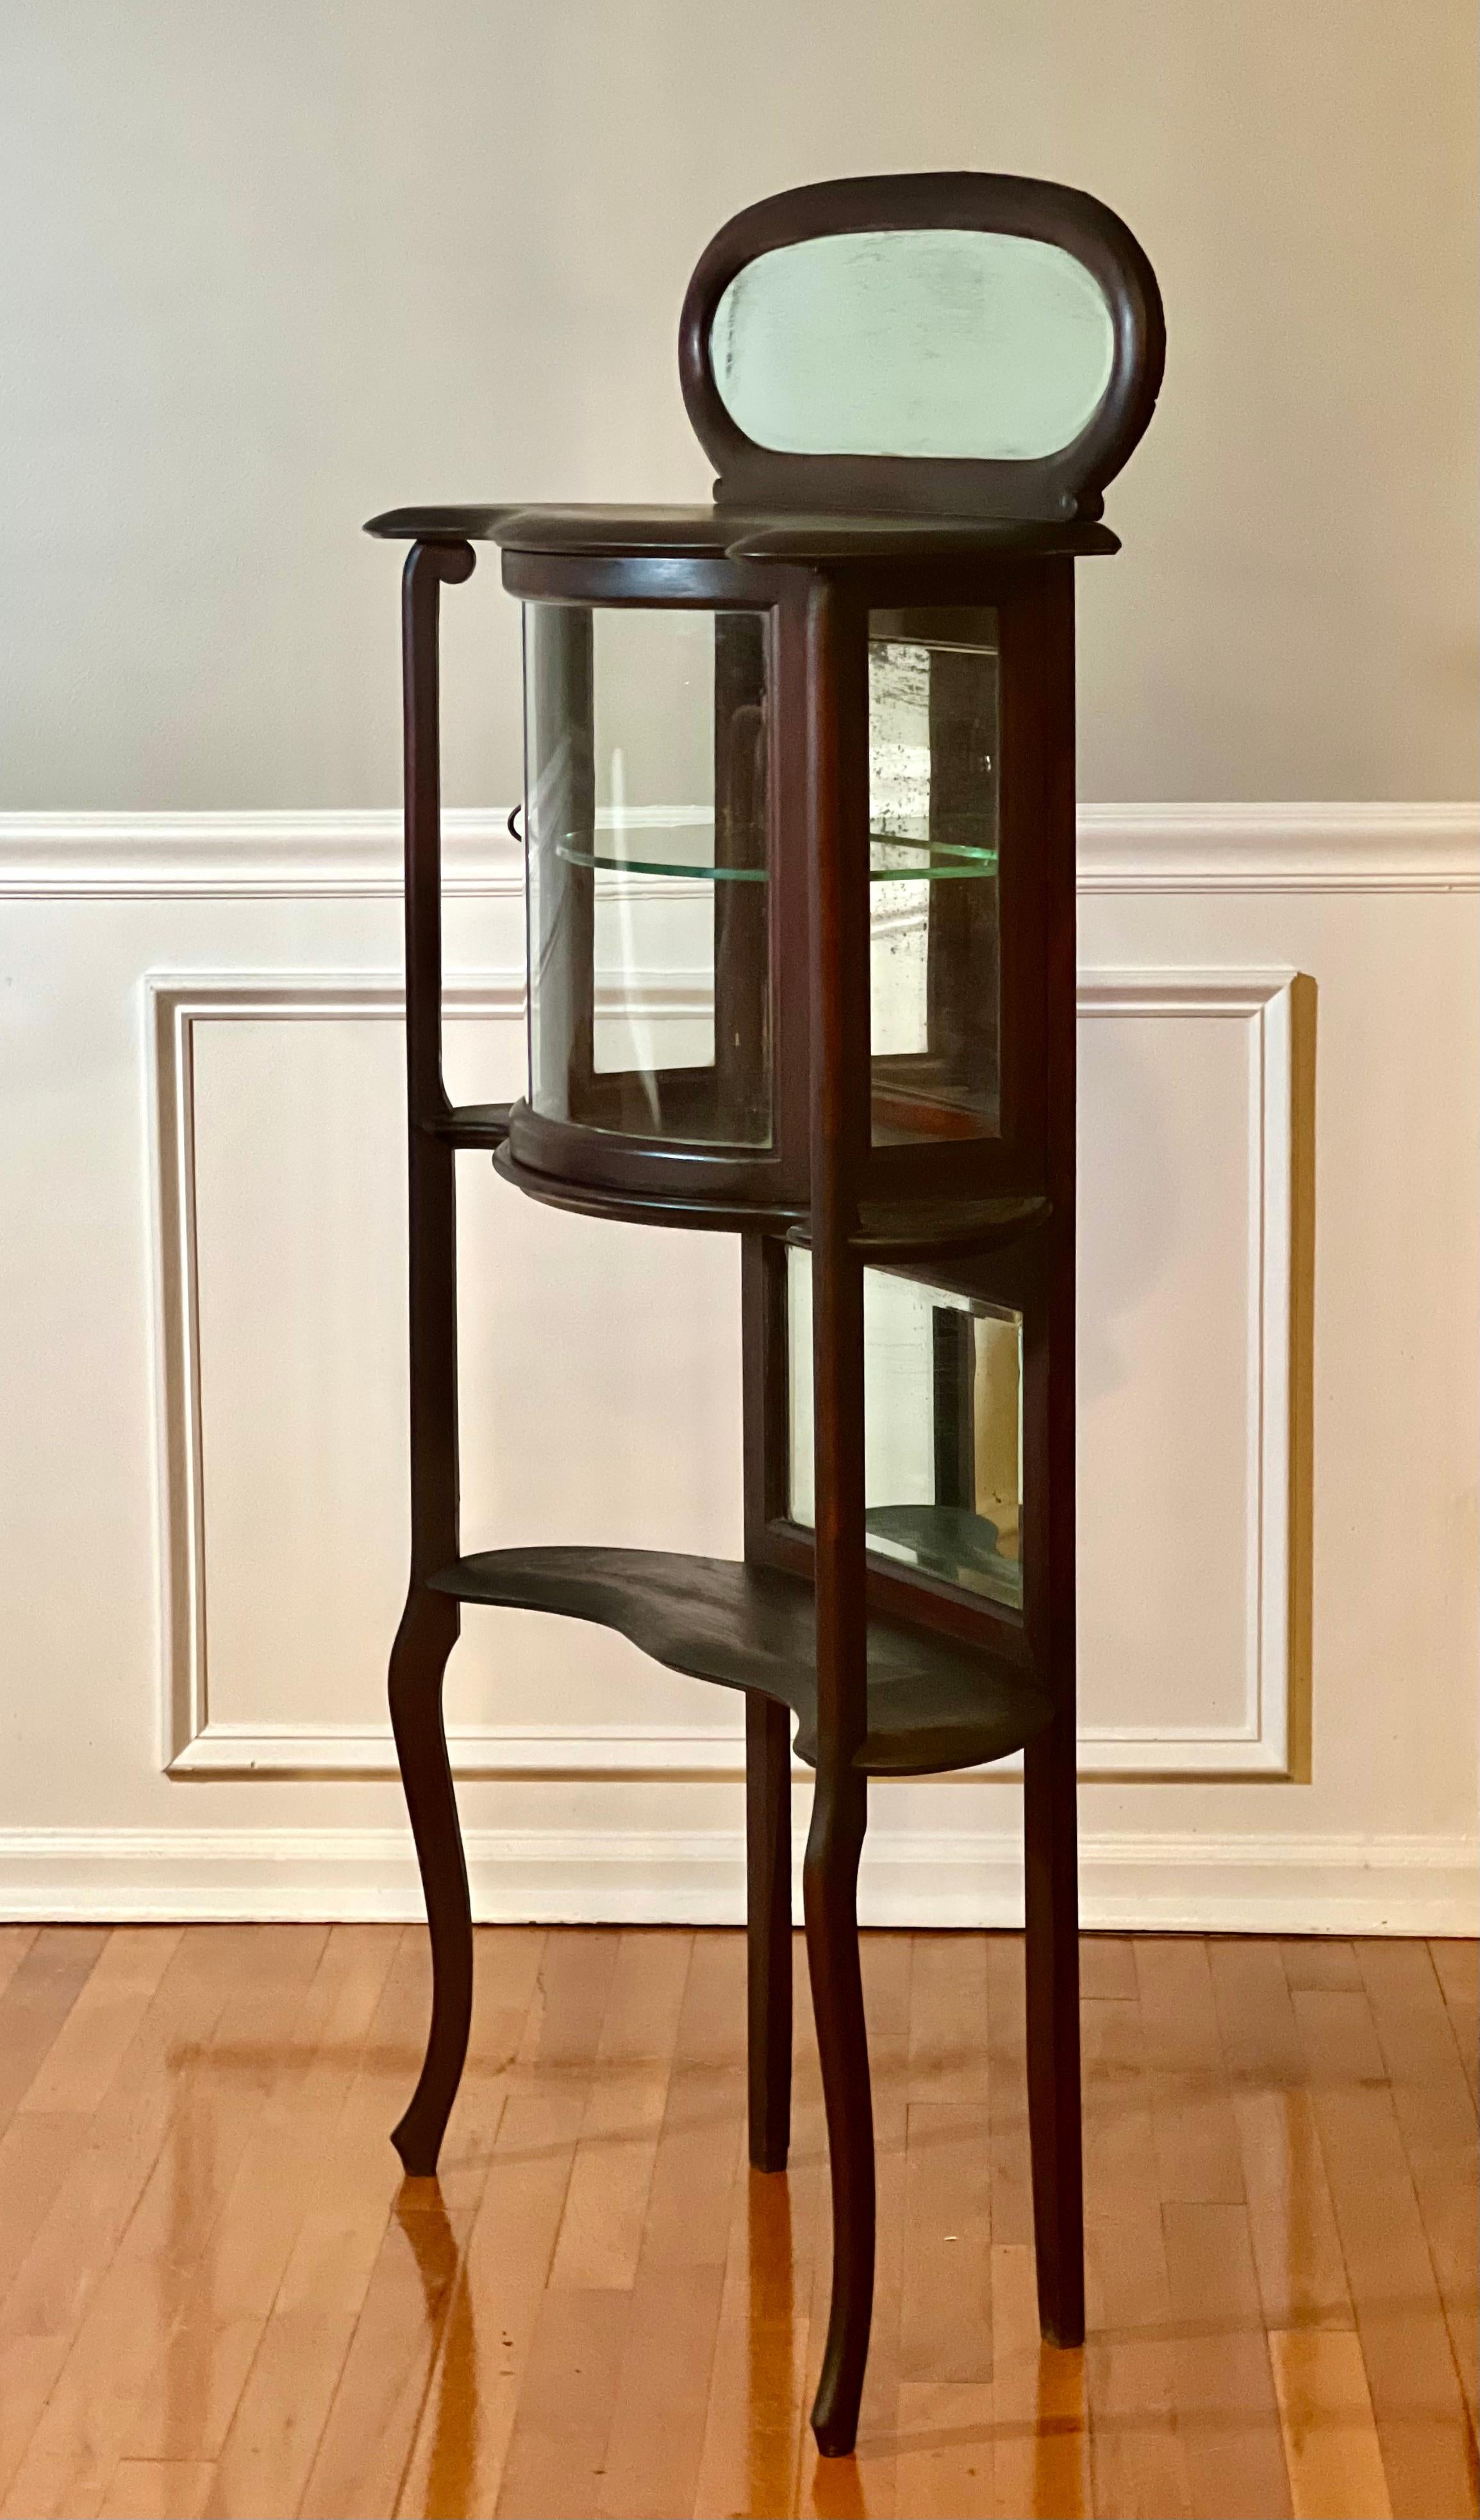 American Art Nouveau étagère with a dark walnut finish, circa 1910's.

A petite étagère with a slim frame suitable for many spaces.  It features beveled mirrors behind beautifully curved, open walnut shelves.  The top mirror has an oval mitered